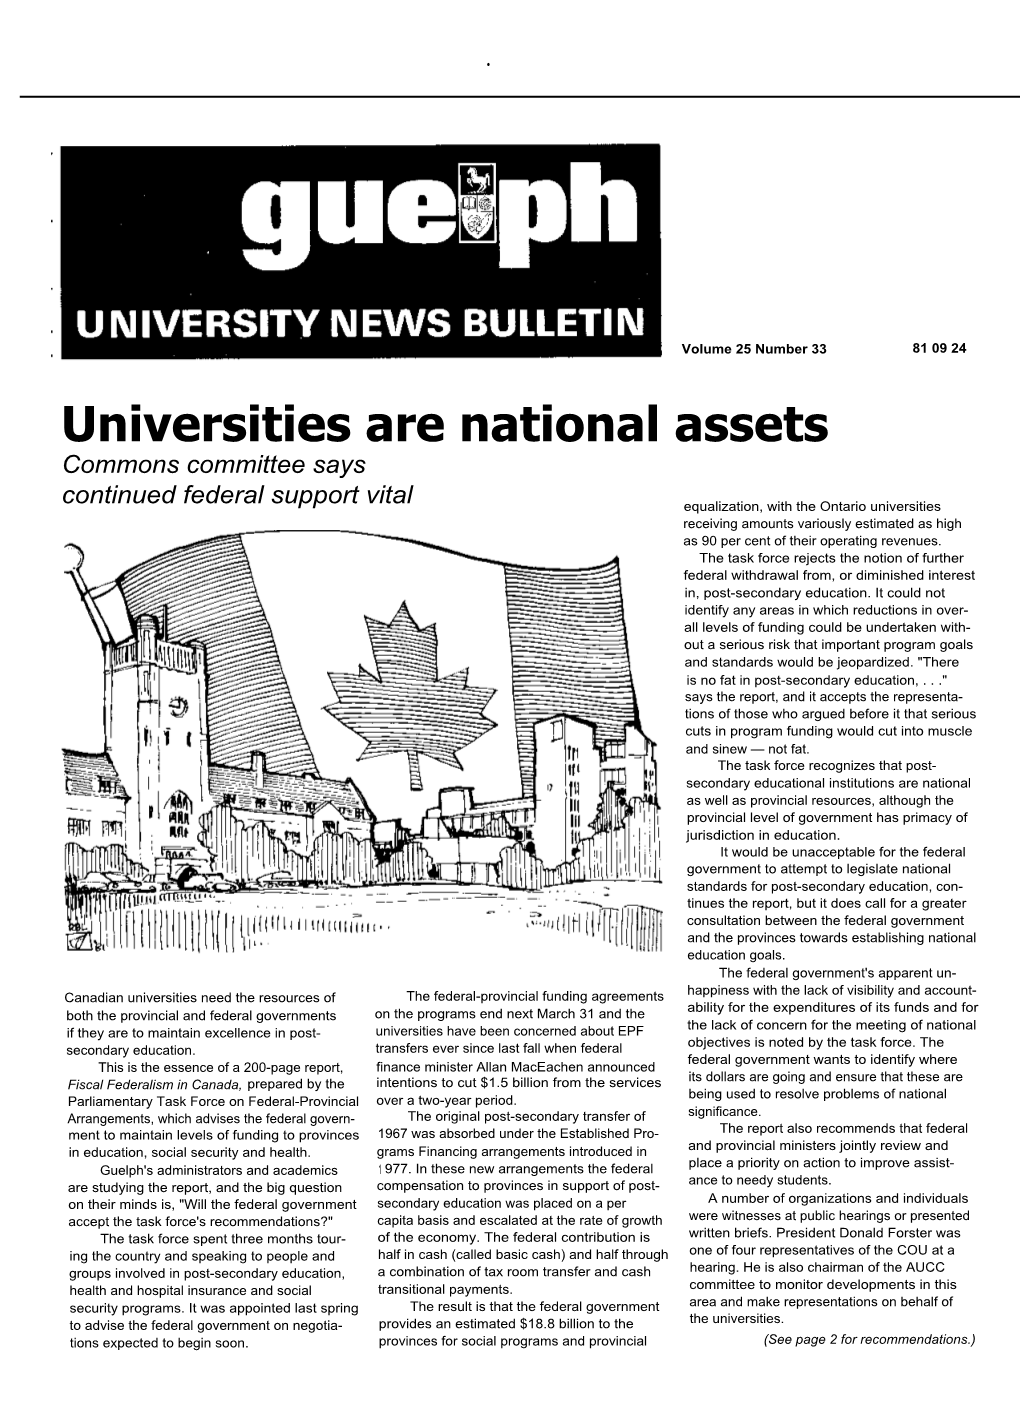 Universities Are National Assets